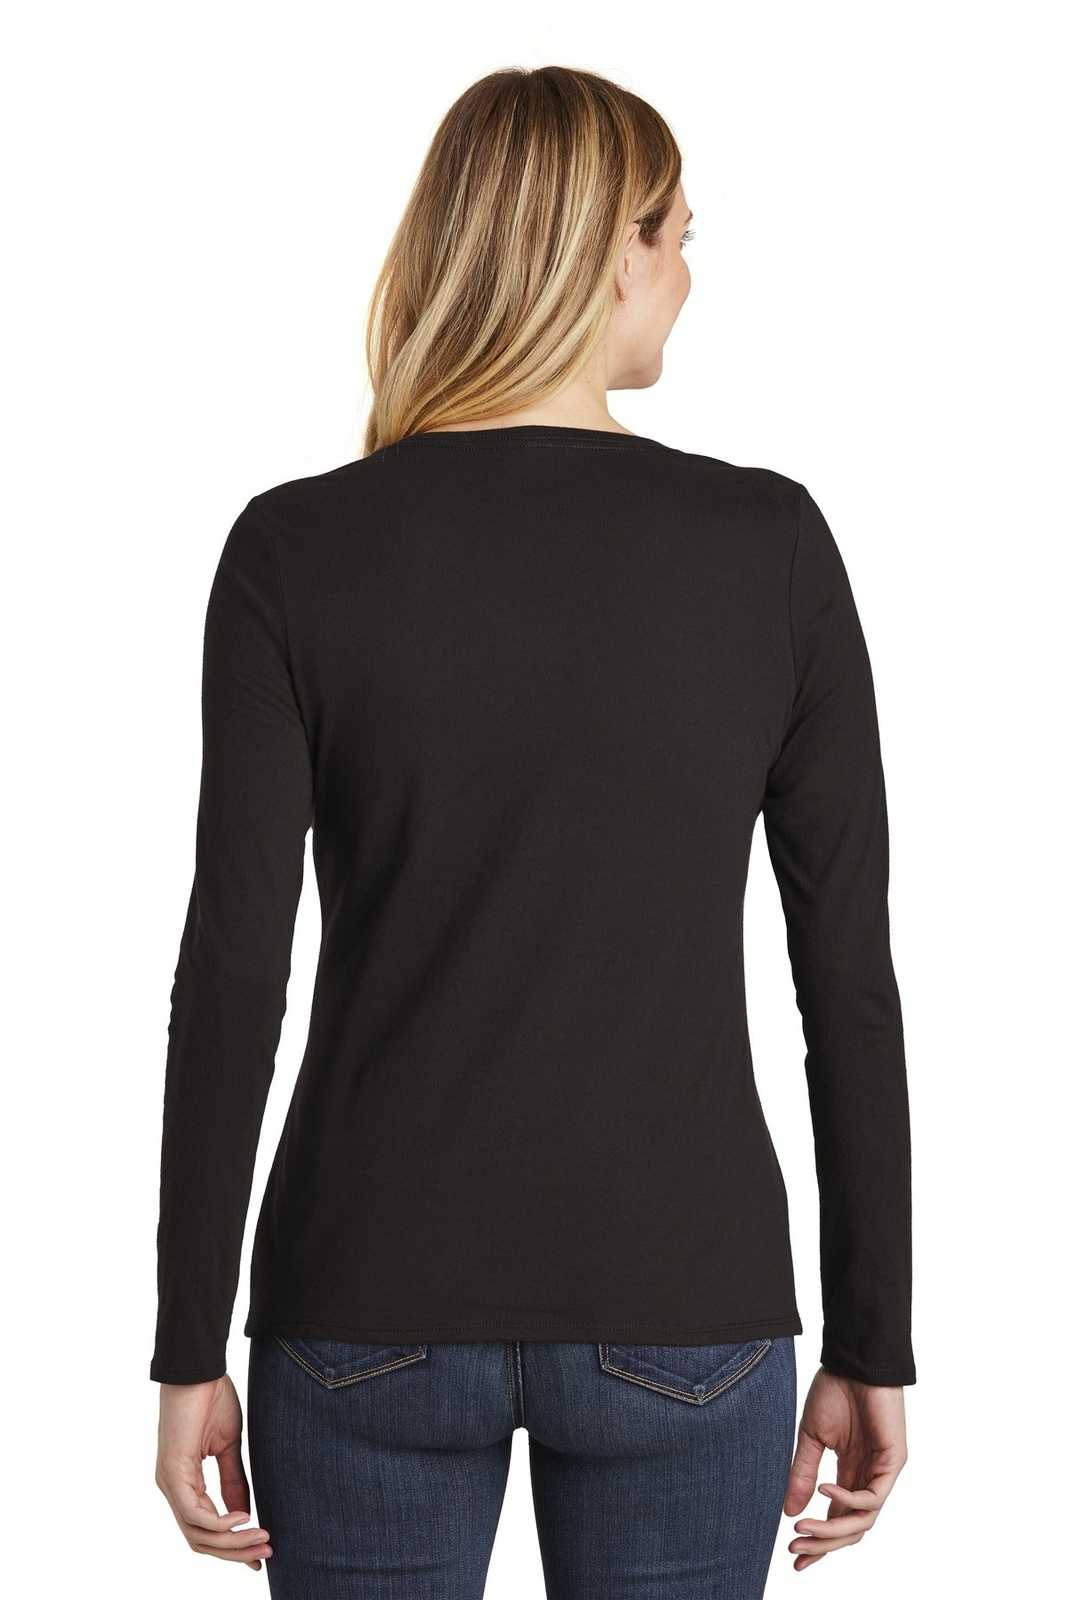 District DT6201 Women's Very Important Tee Long Sleeve V-Neck - Black - HIT a Double - 1